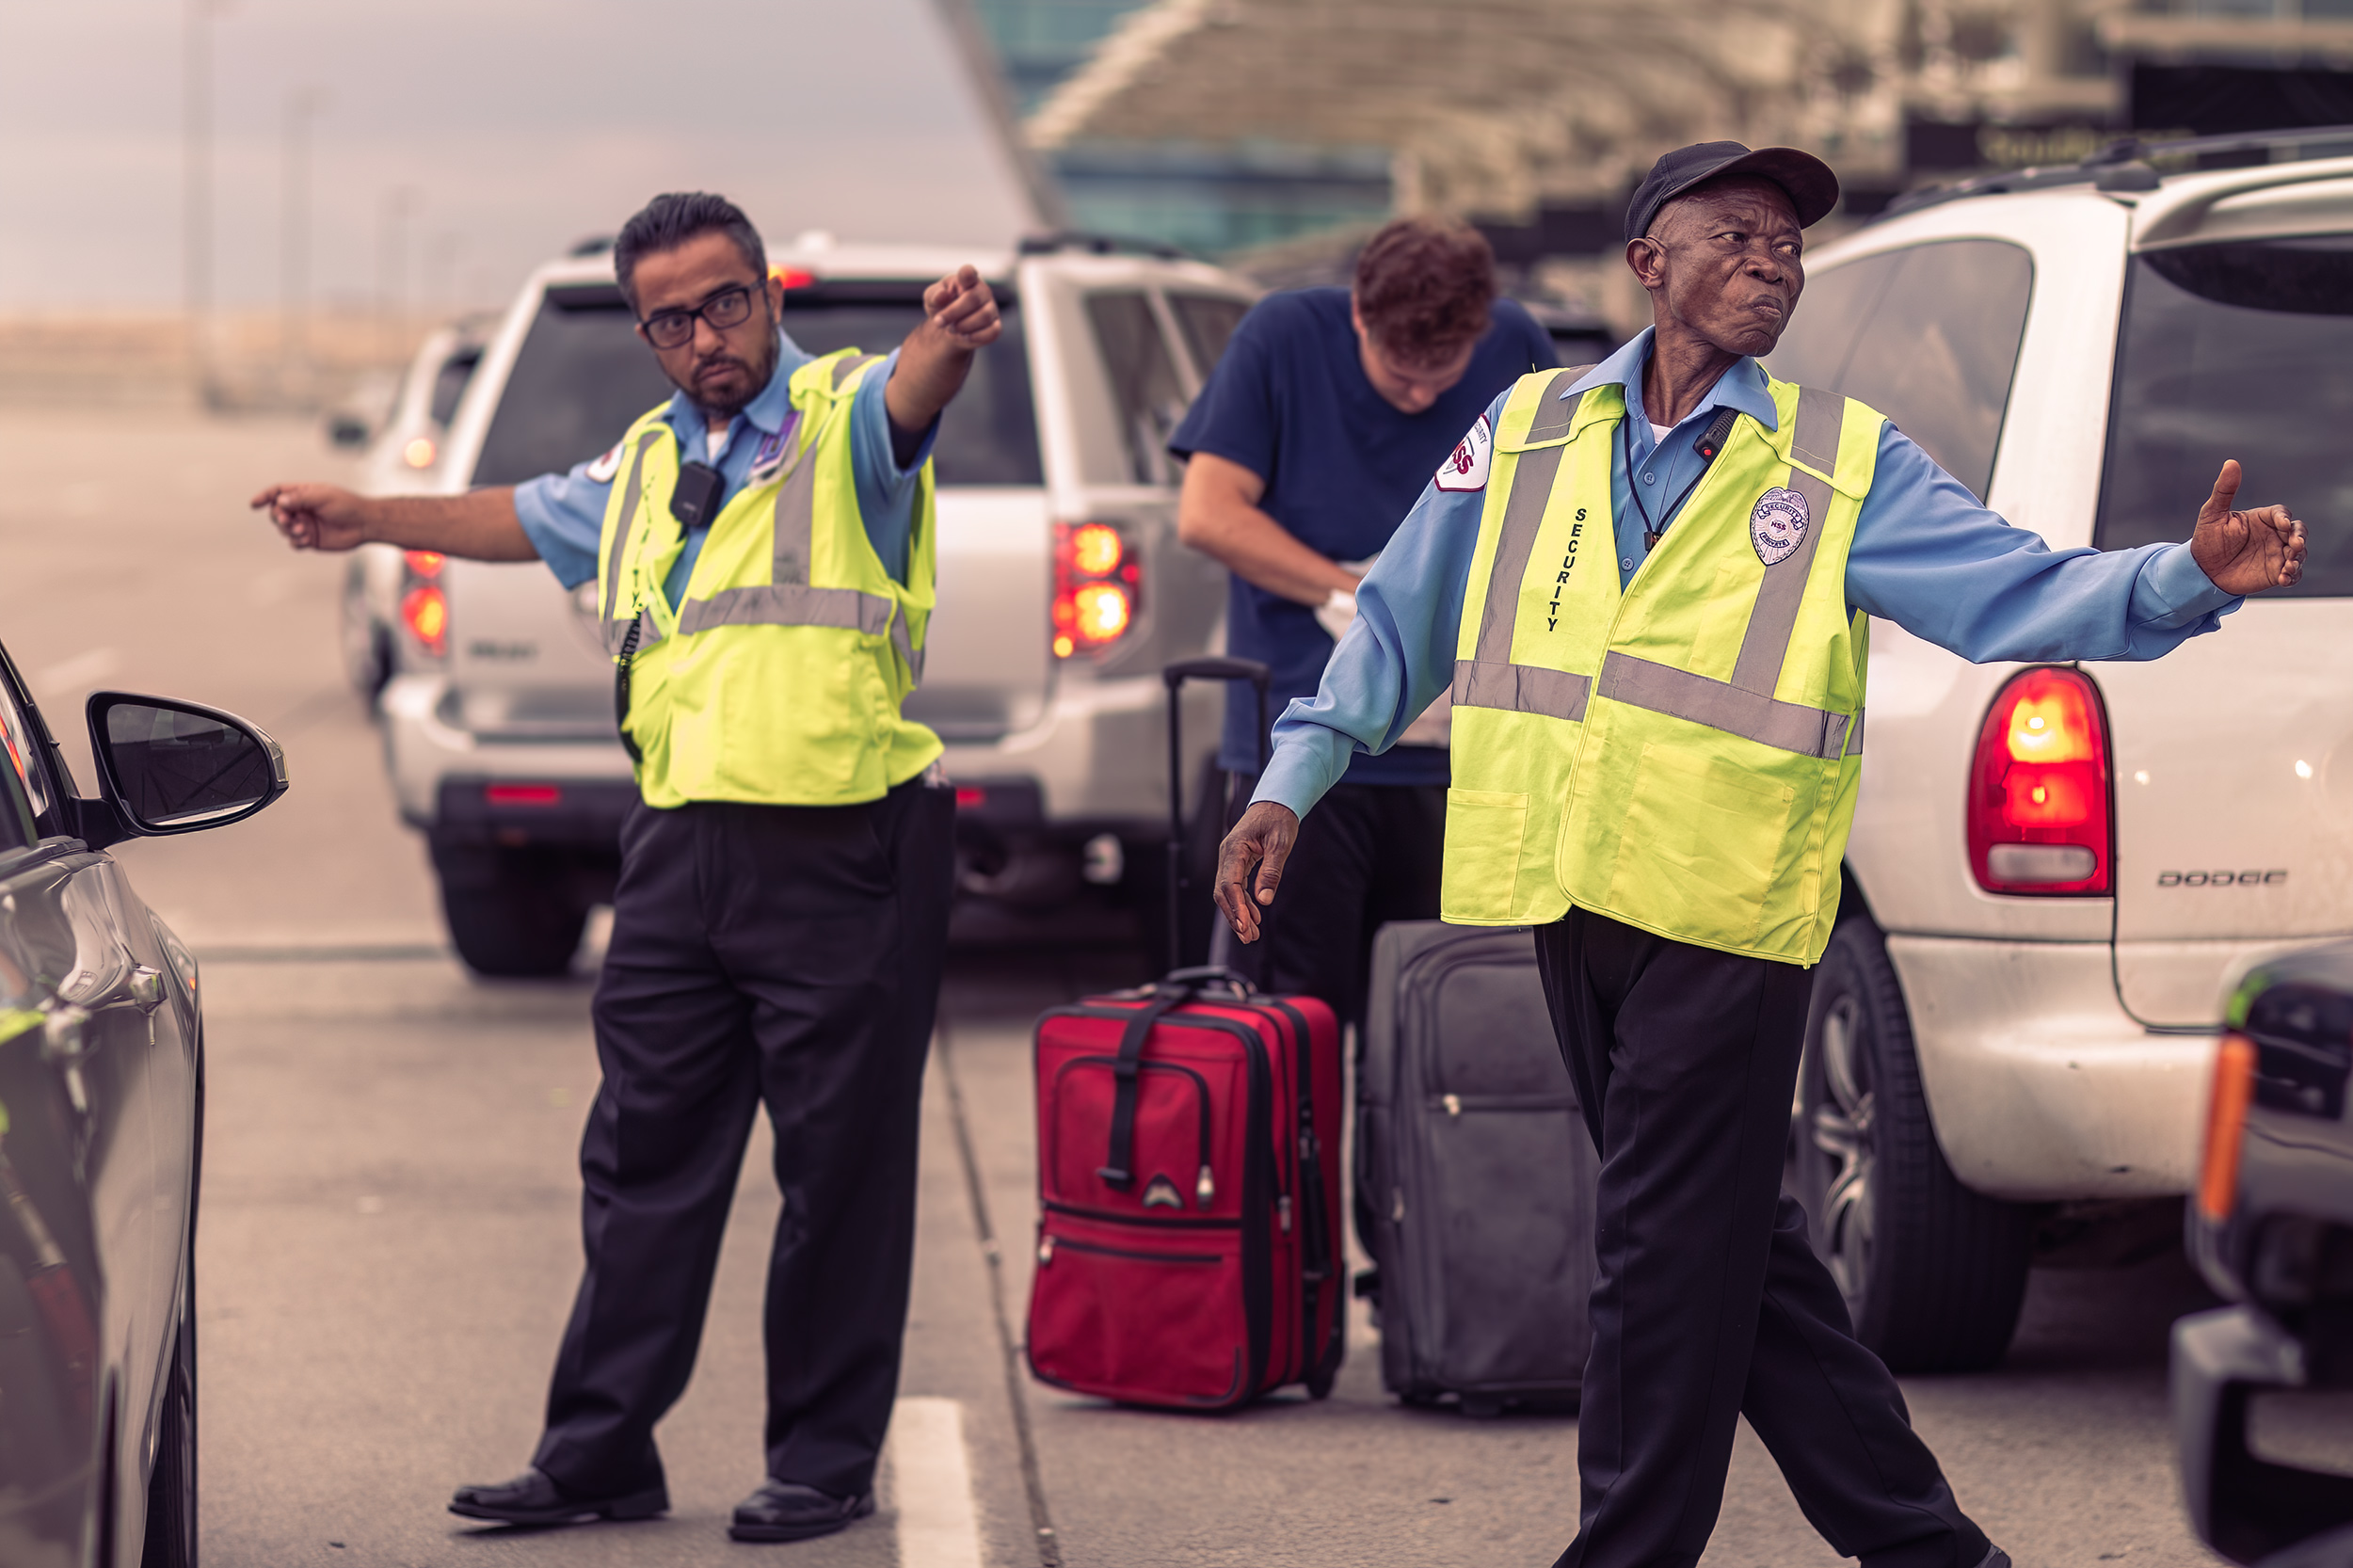 Security Guards directing traffic at airport for HSS advertising. 